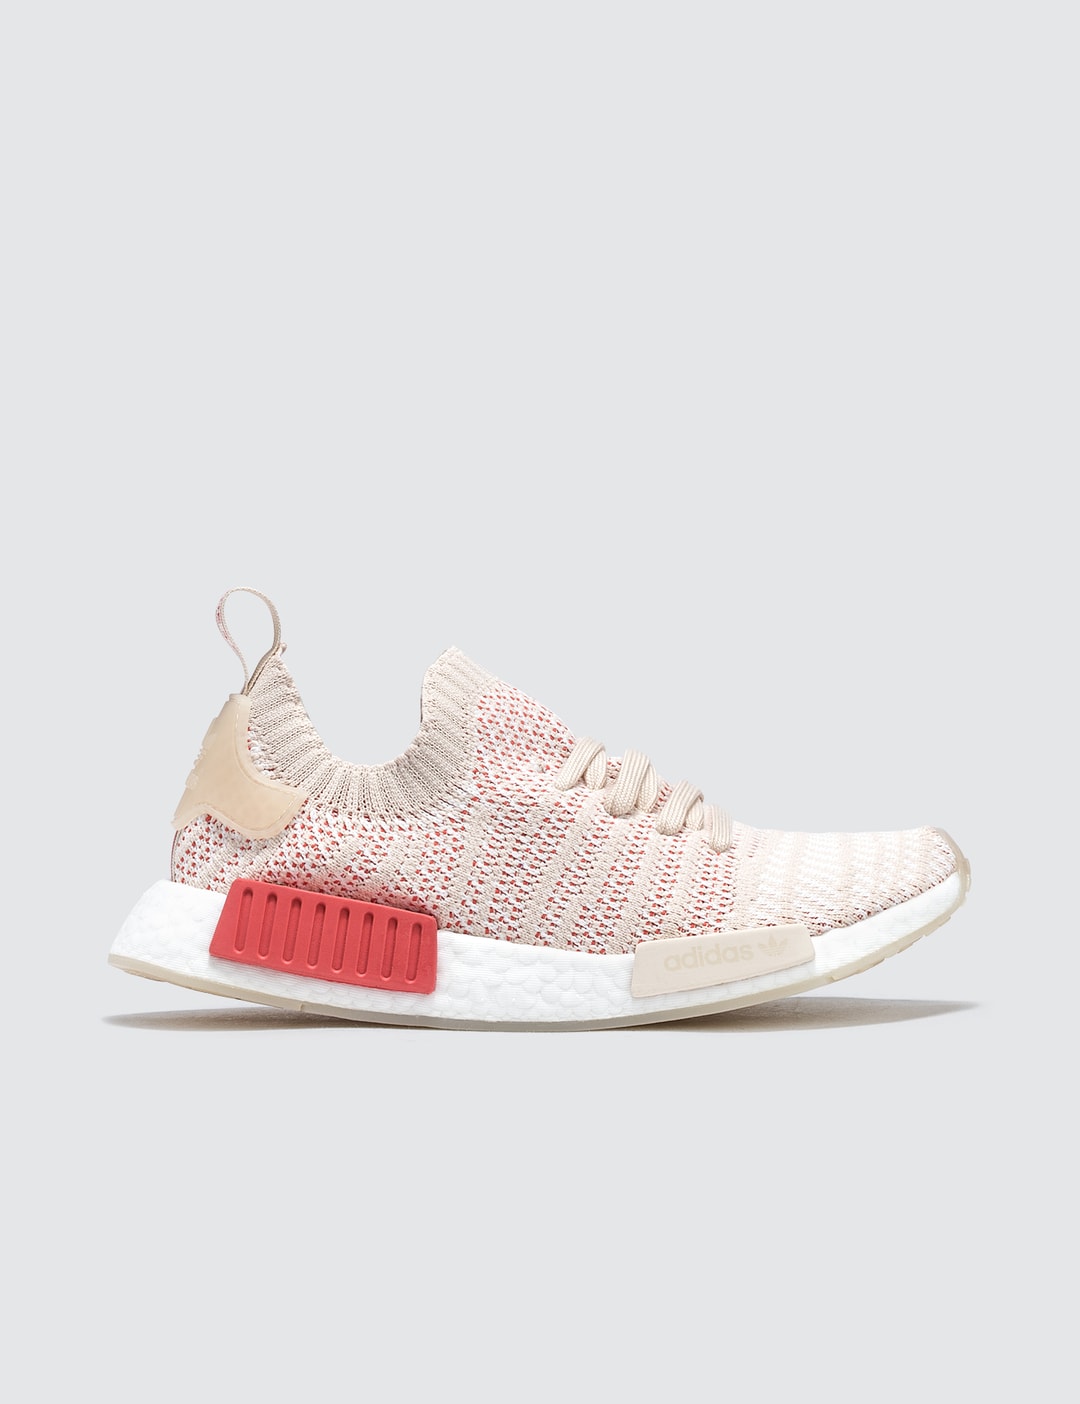 Adidas Originals NMD R1 PK W | HBX - Globally Curated Fashion and Lifestyle by Hypebeast